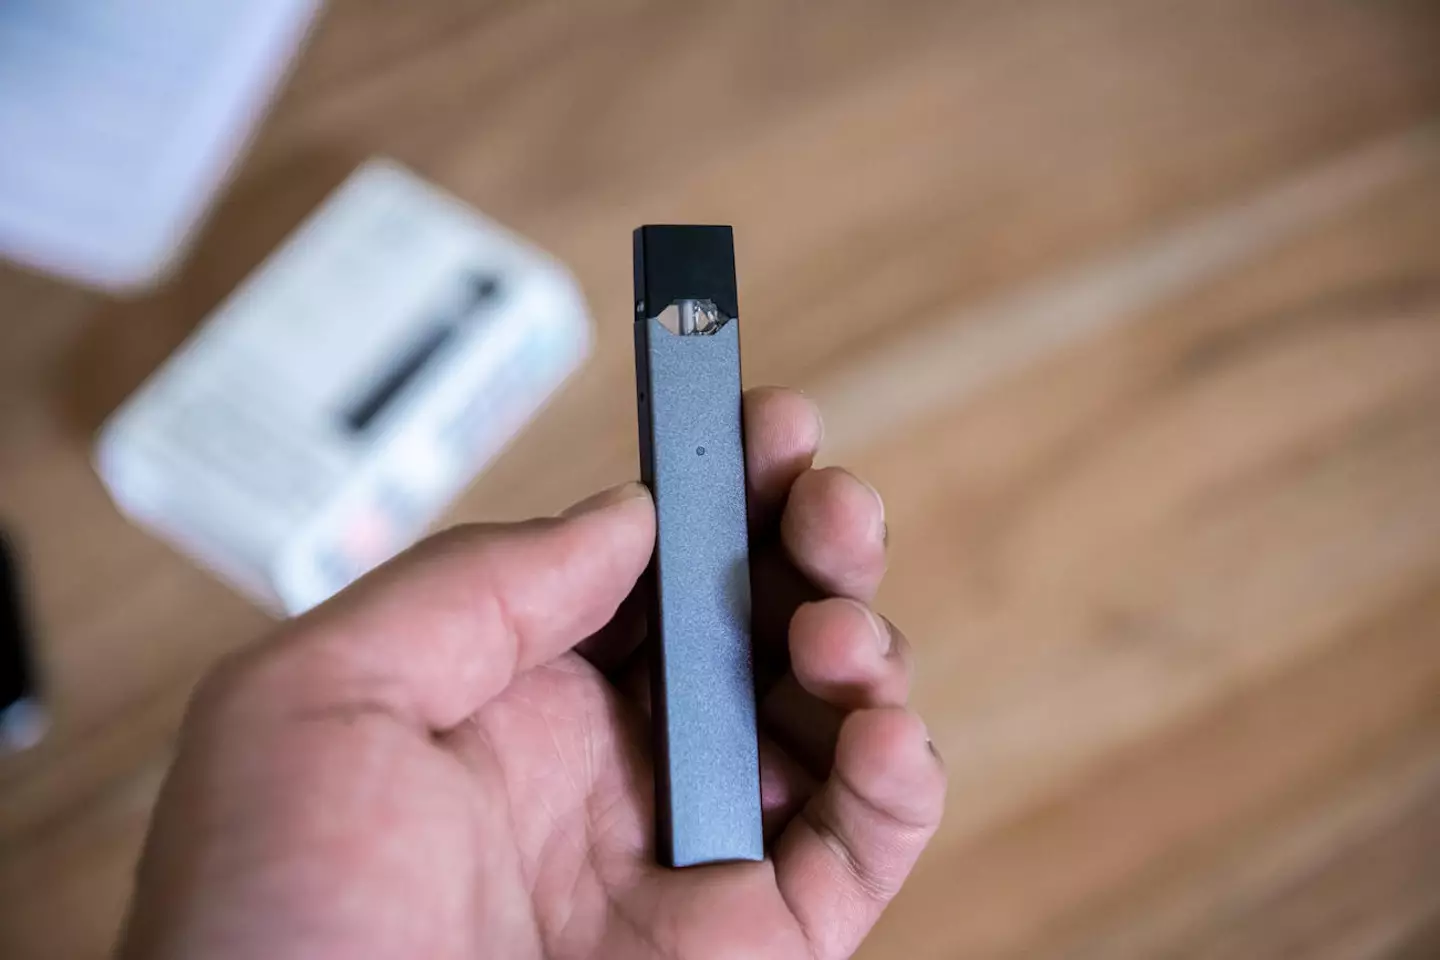 JUUL products are reportedly being forced to remove its e-cigarettes from the US market.